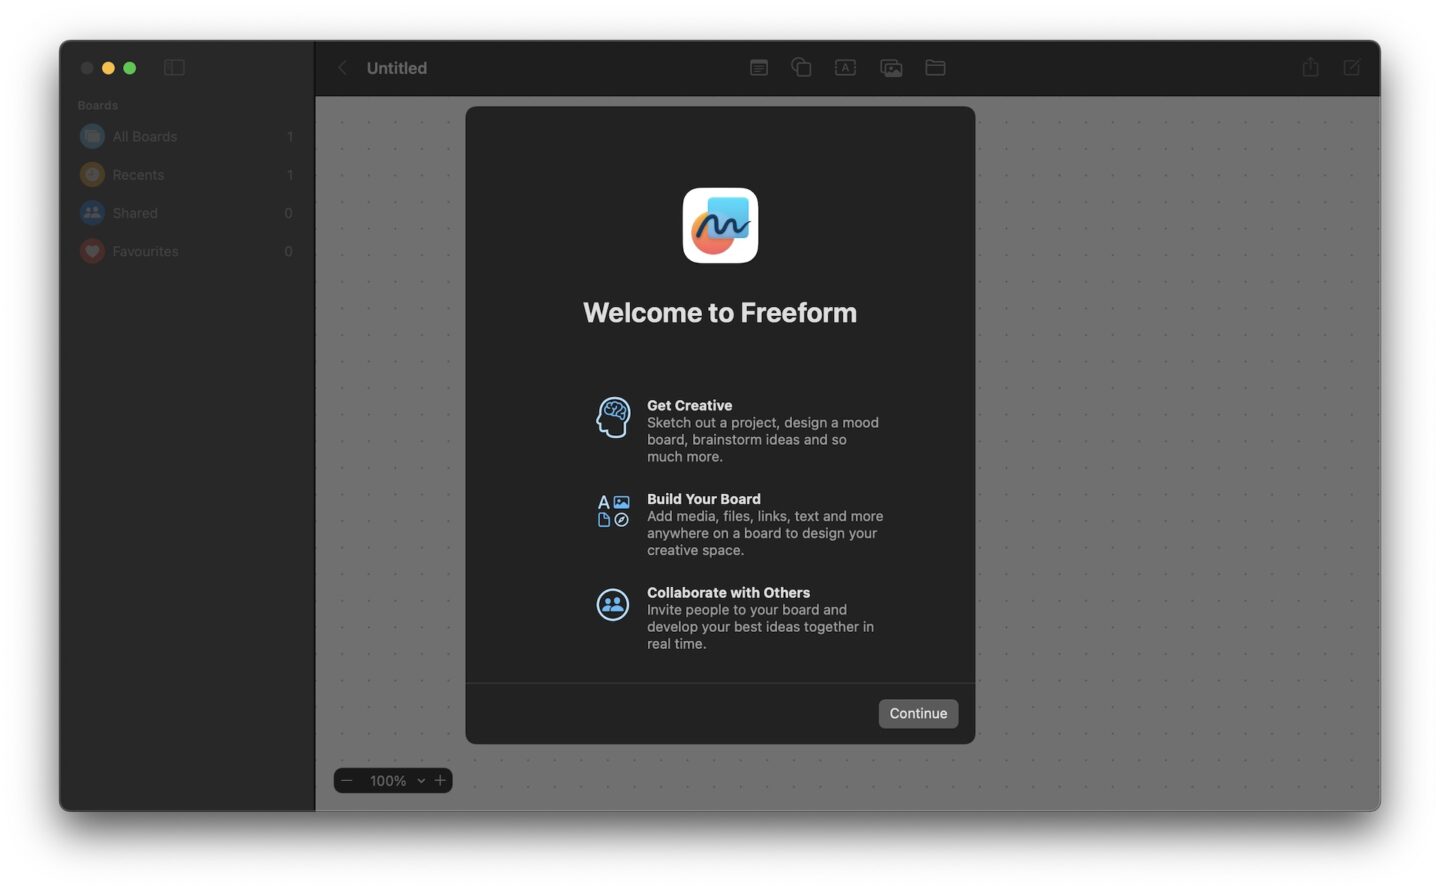 Updates to Apple's operating systems come with a new Freeform app